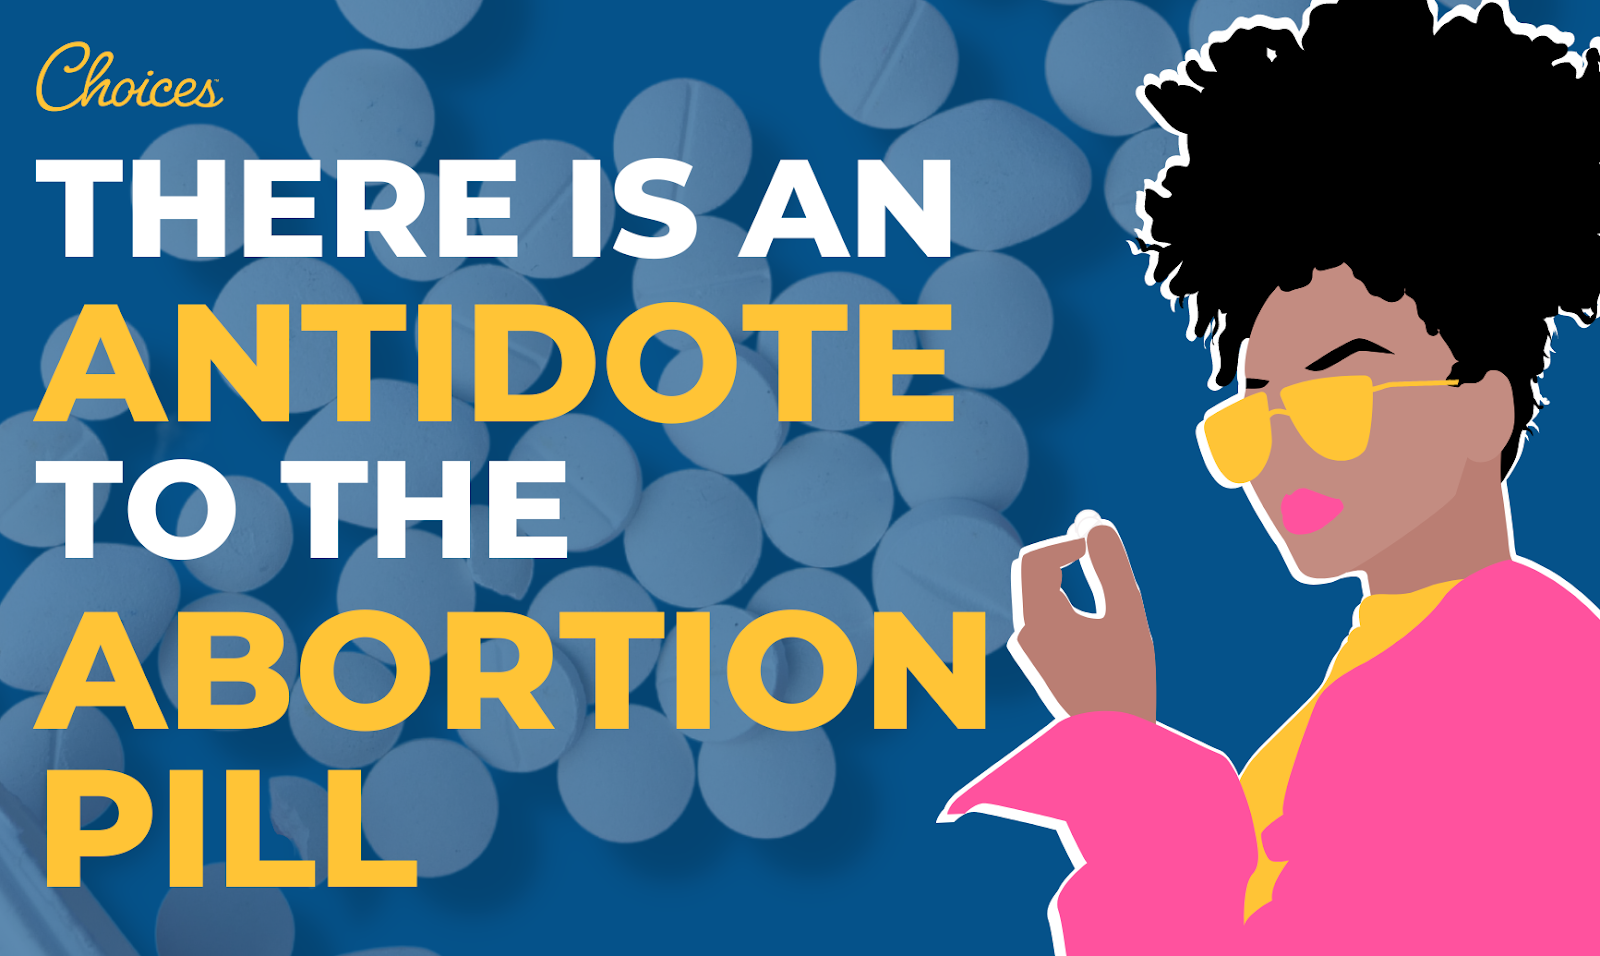 There Is an Antidote to the Abortion Pill